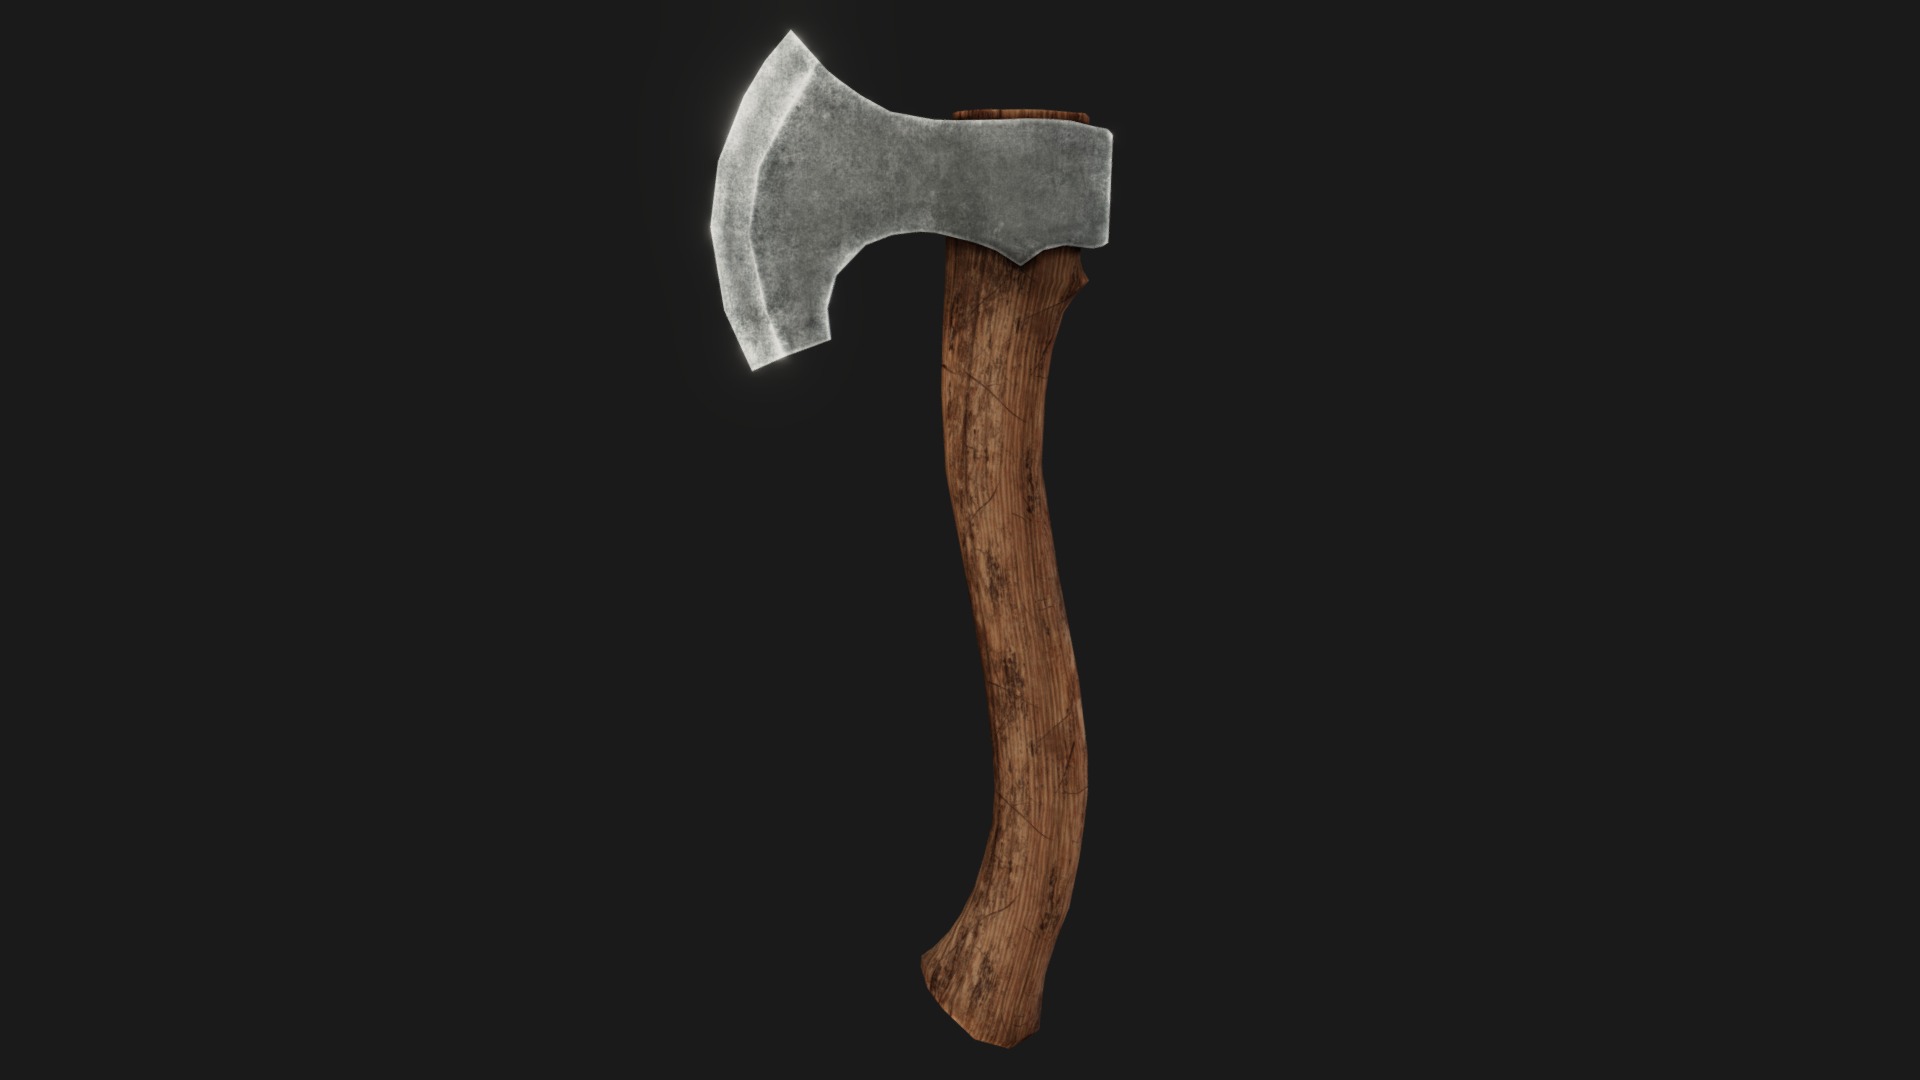 3D model Carving Axe – 3D Low Poly Model - This is a 3D model of the Carving Axe - 3D Low Poly Model. The 3D model is about a wooden axe with a white cap.